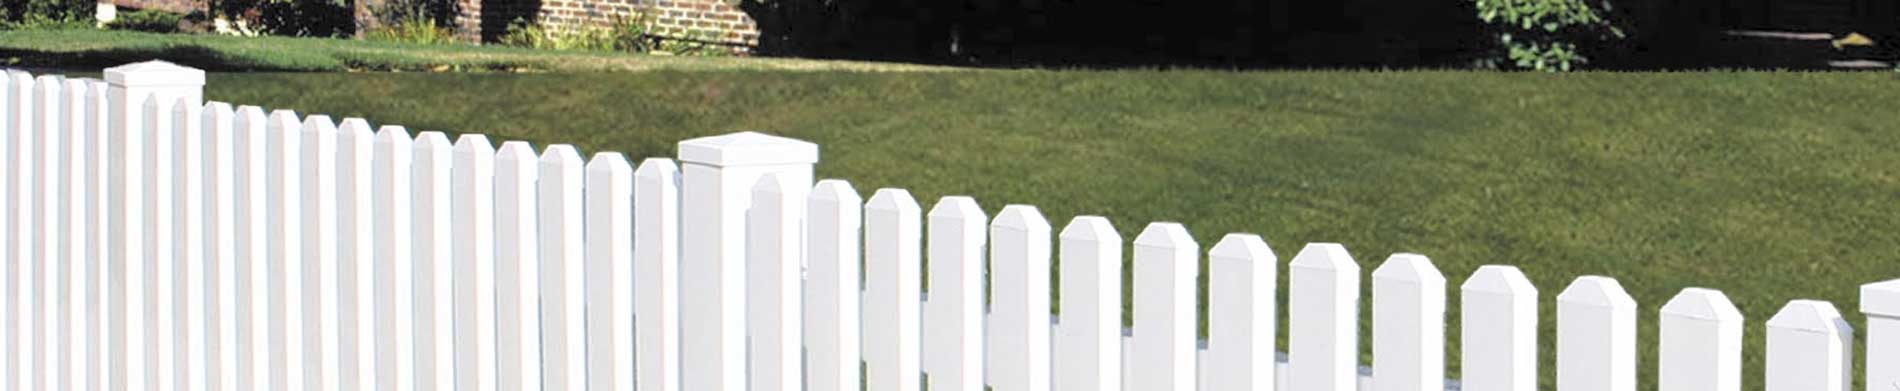 Vinyl fencing is a modern home improvement choice – Install a Duramax fence